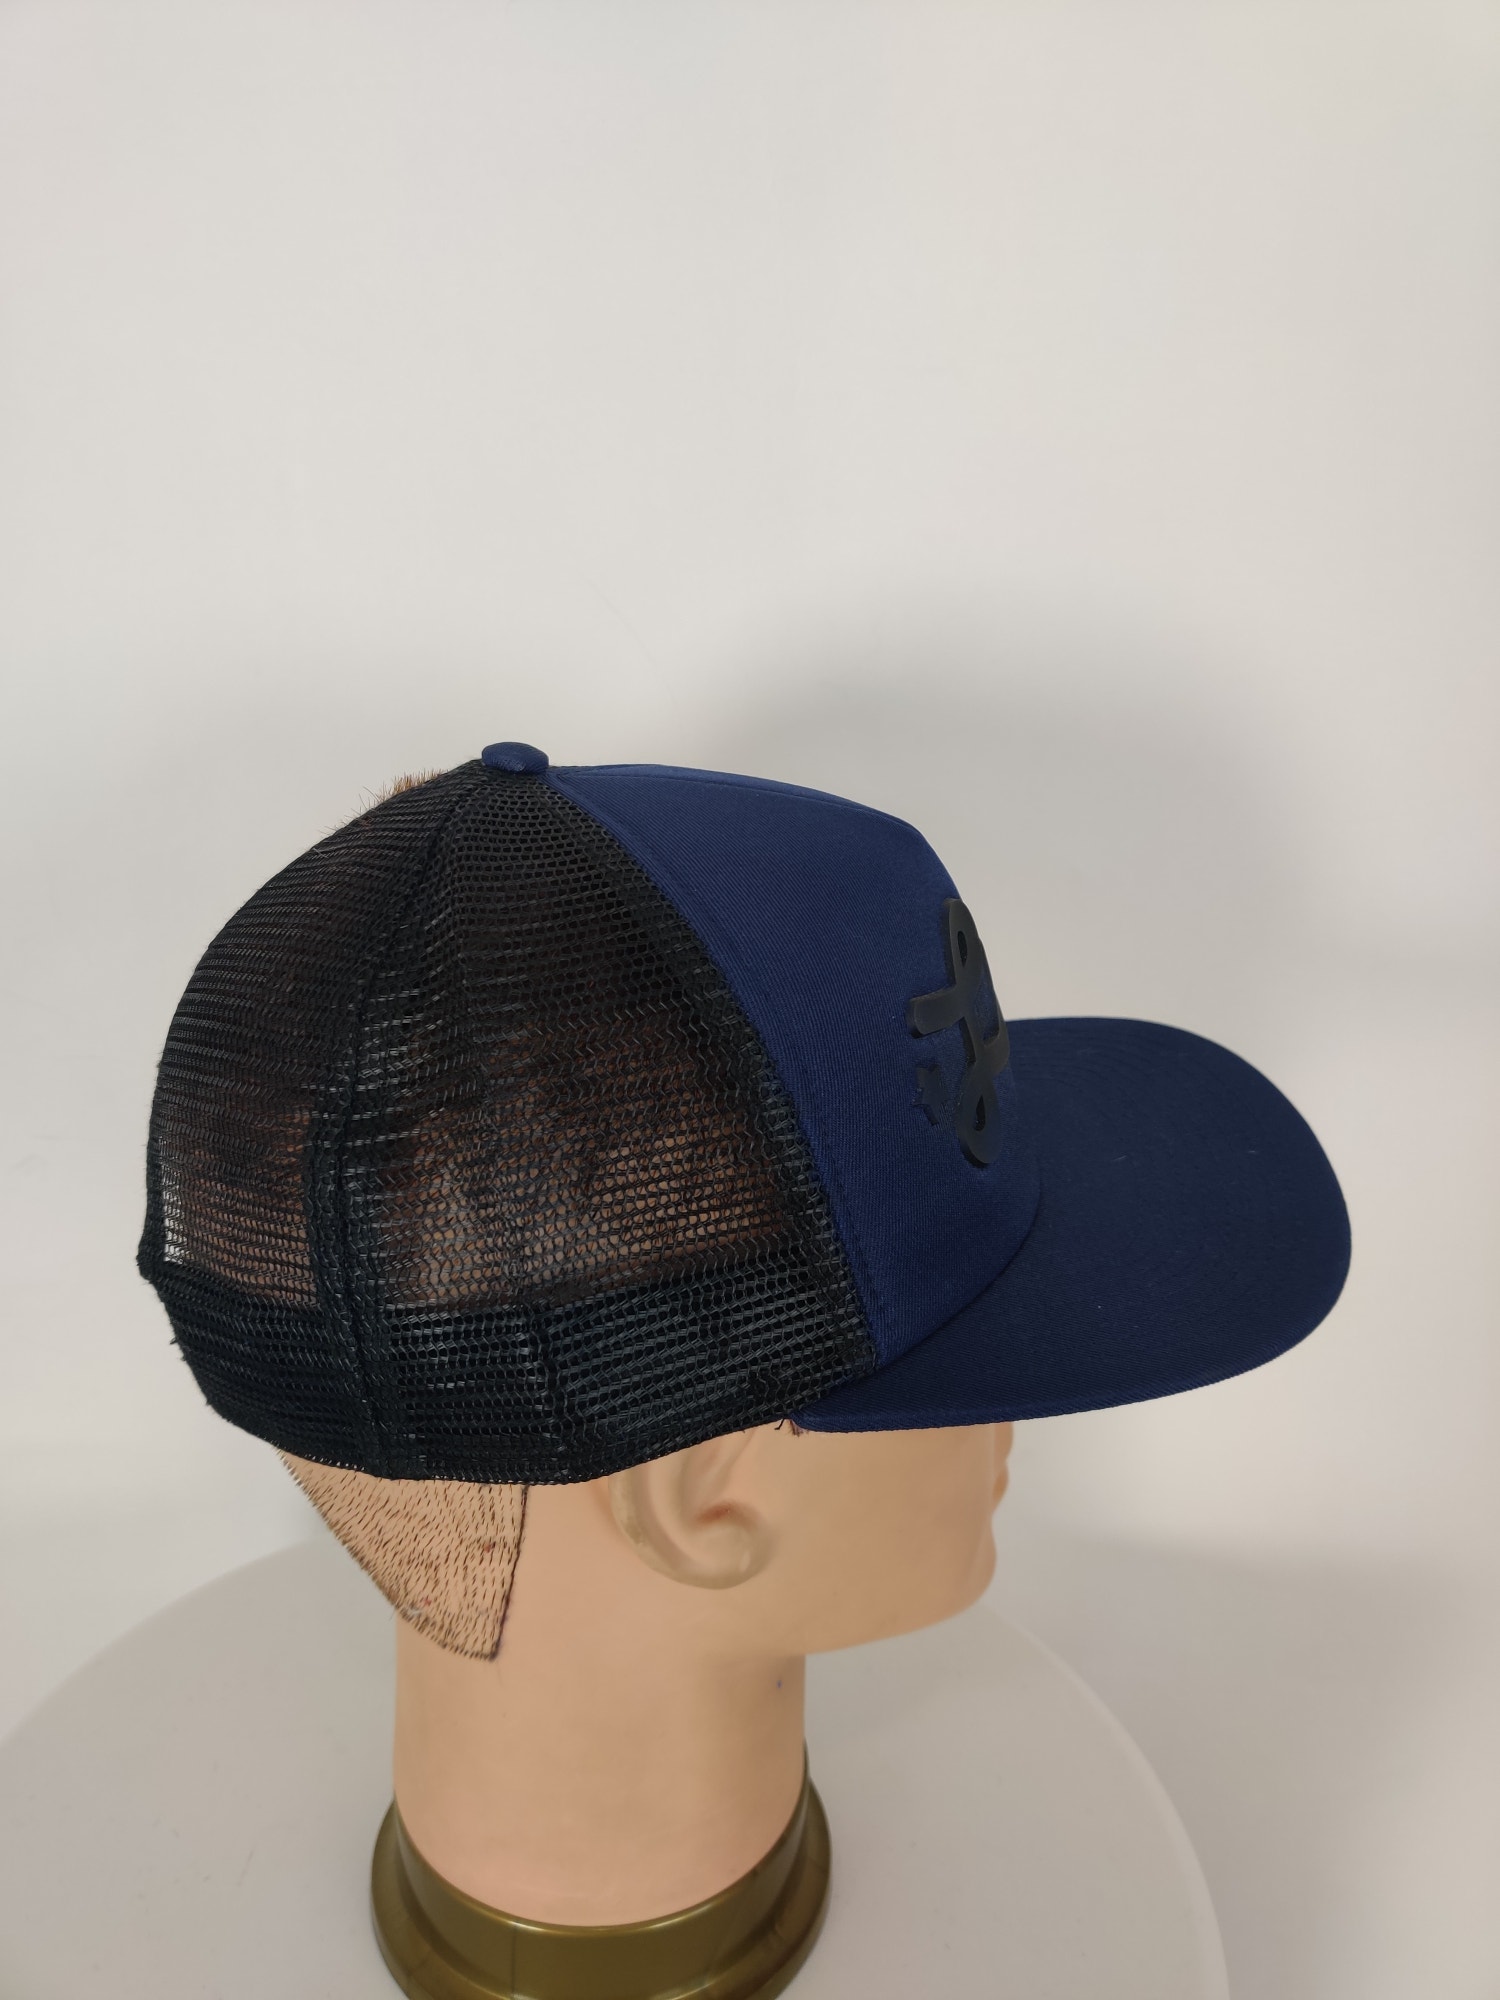 (V) ORIGINAL LRG Unisex hat hiking casual mesh back navy One size  - Picture 5 of 11